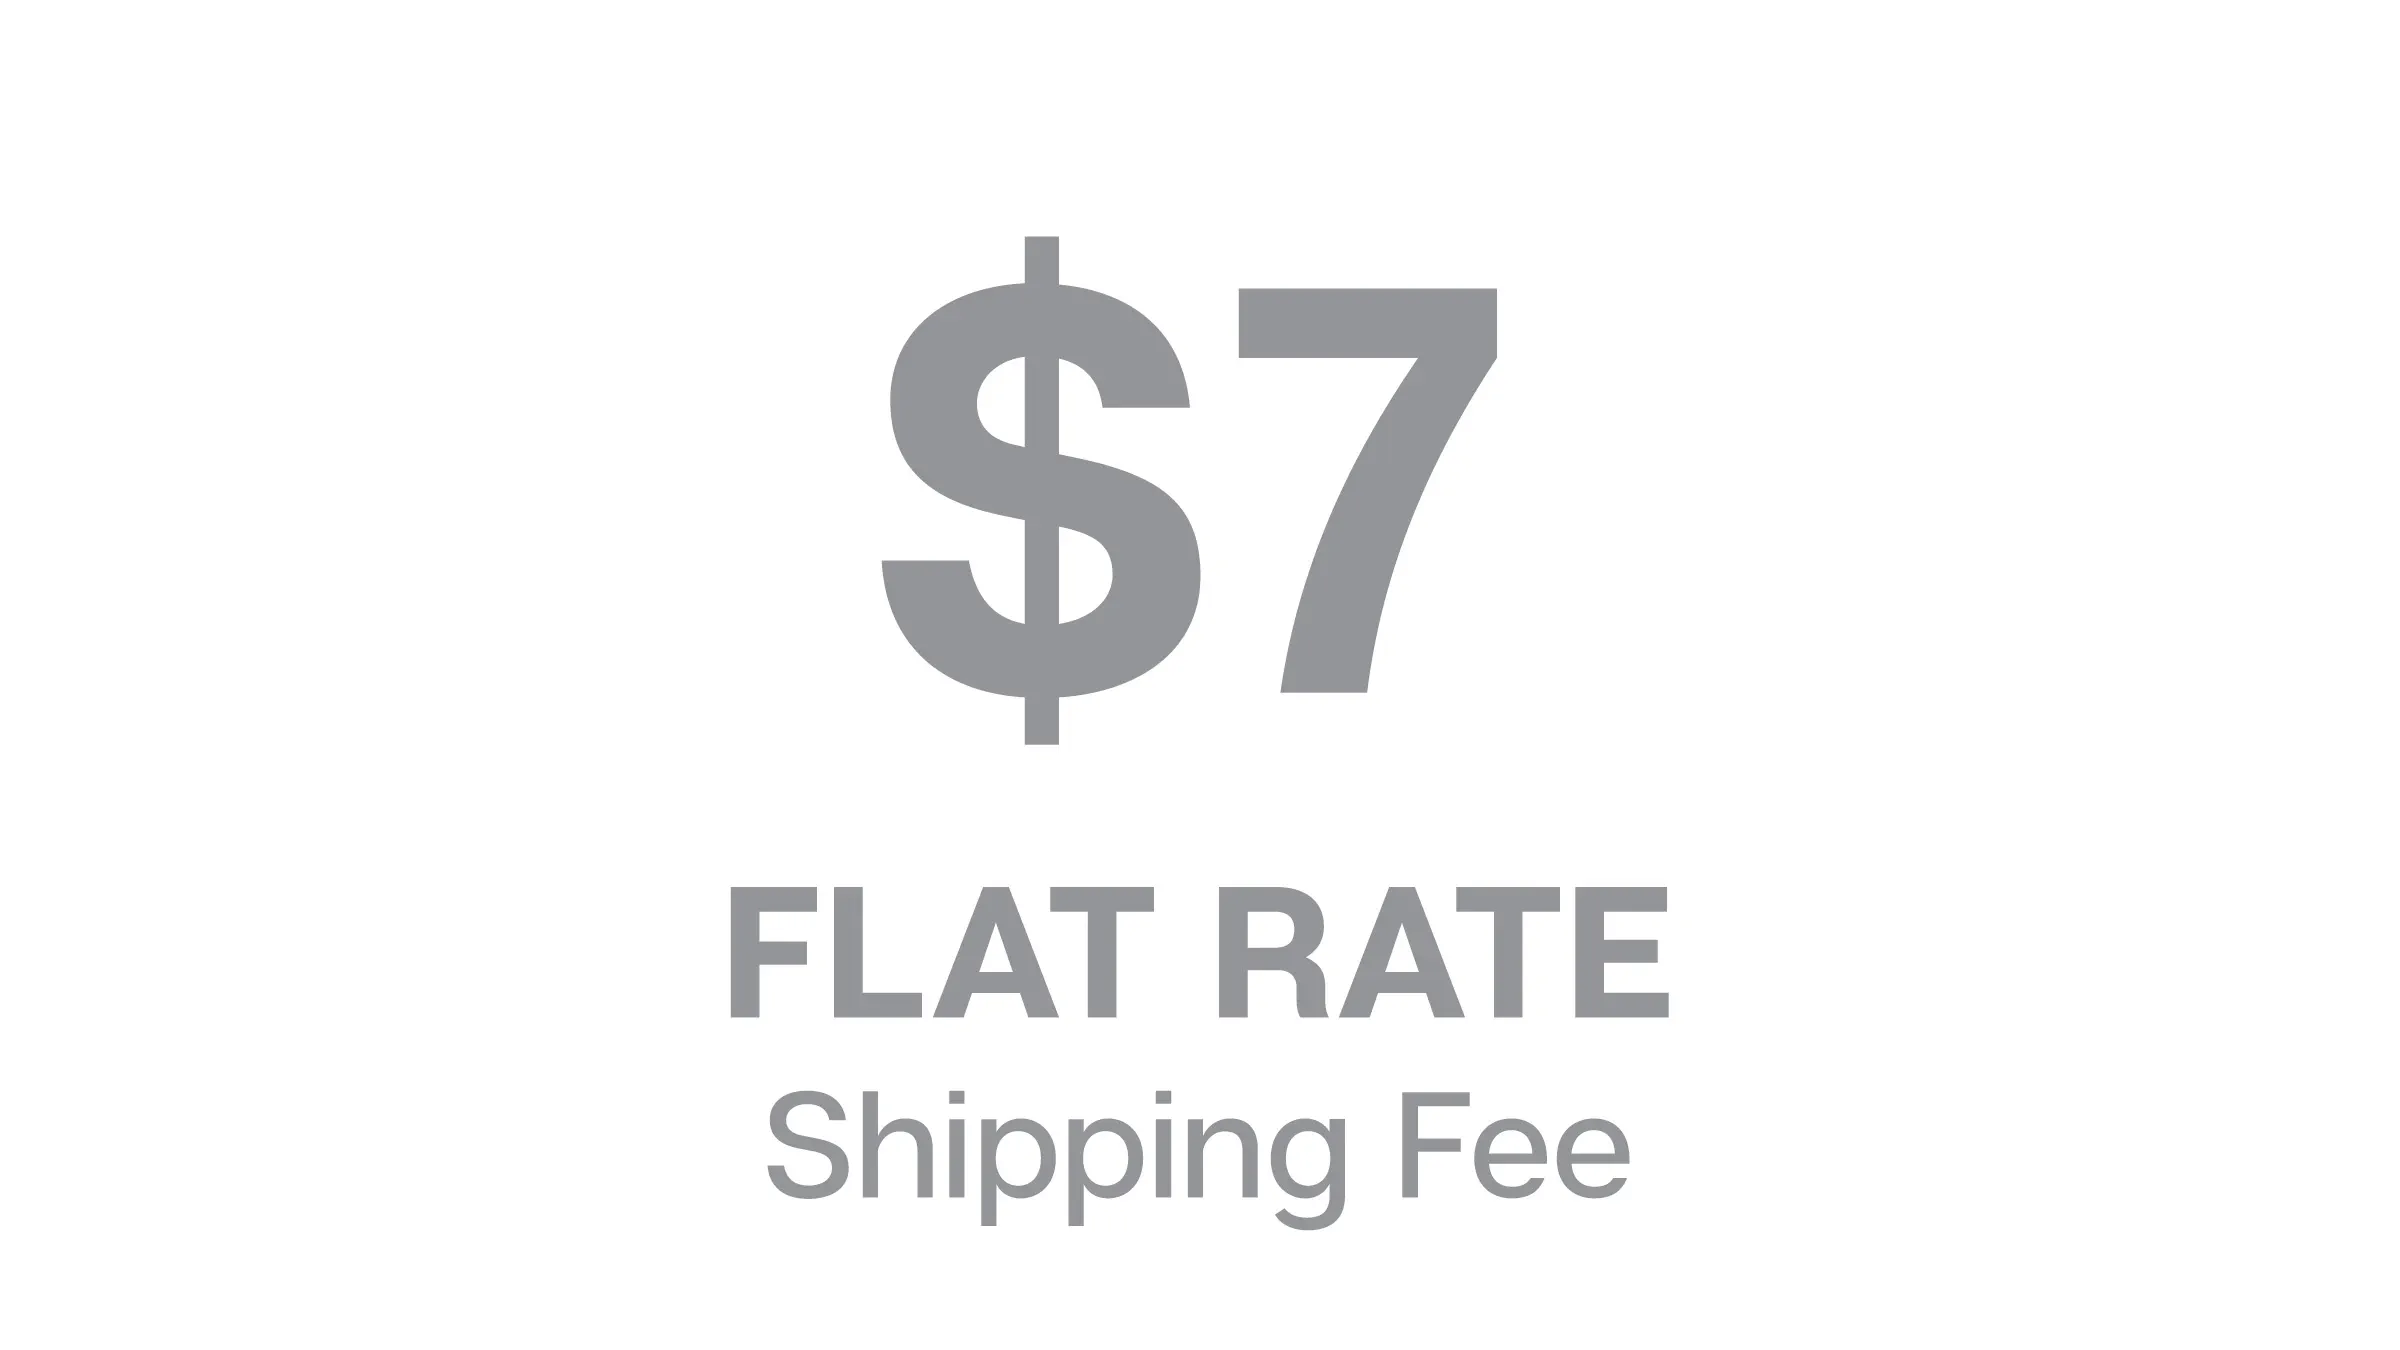 $7 Flat Rate Shipping Fee